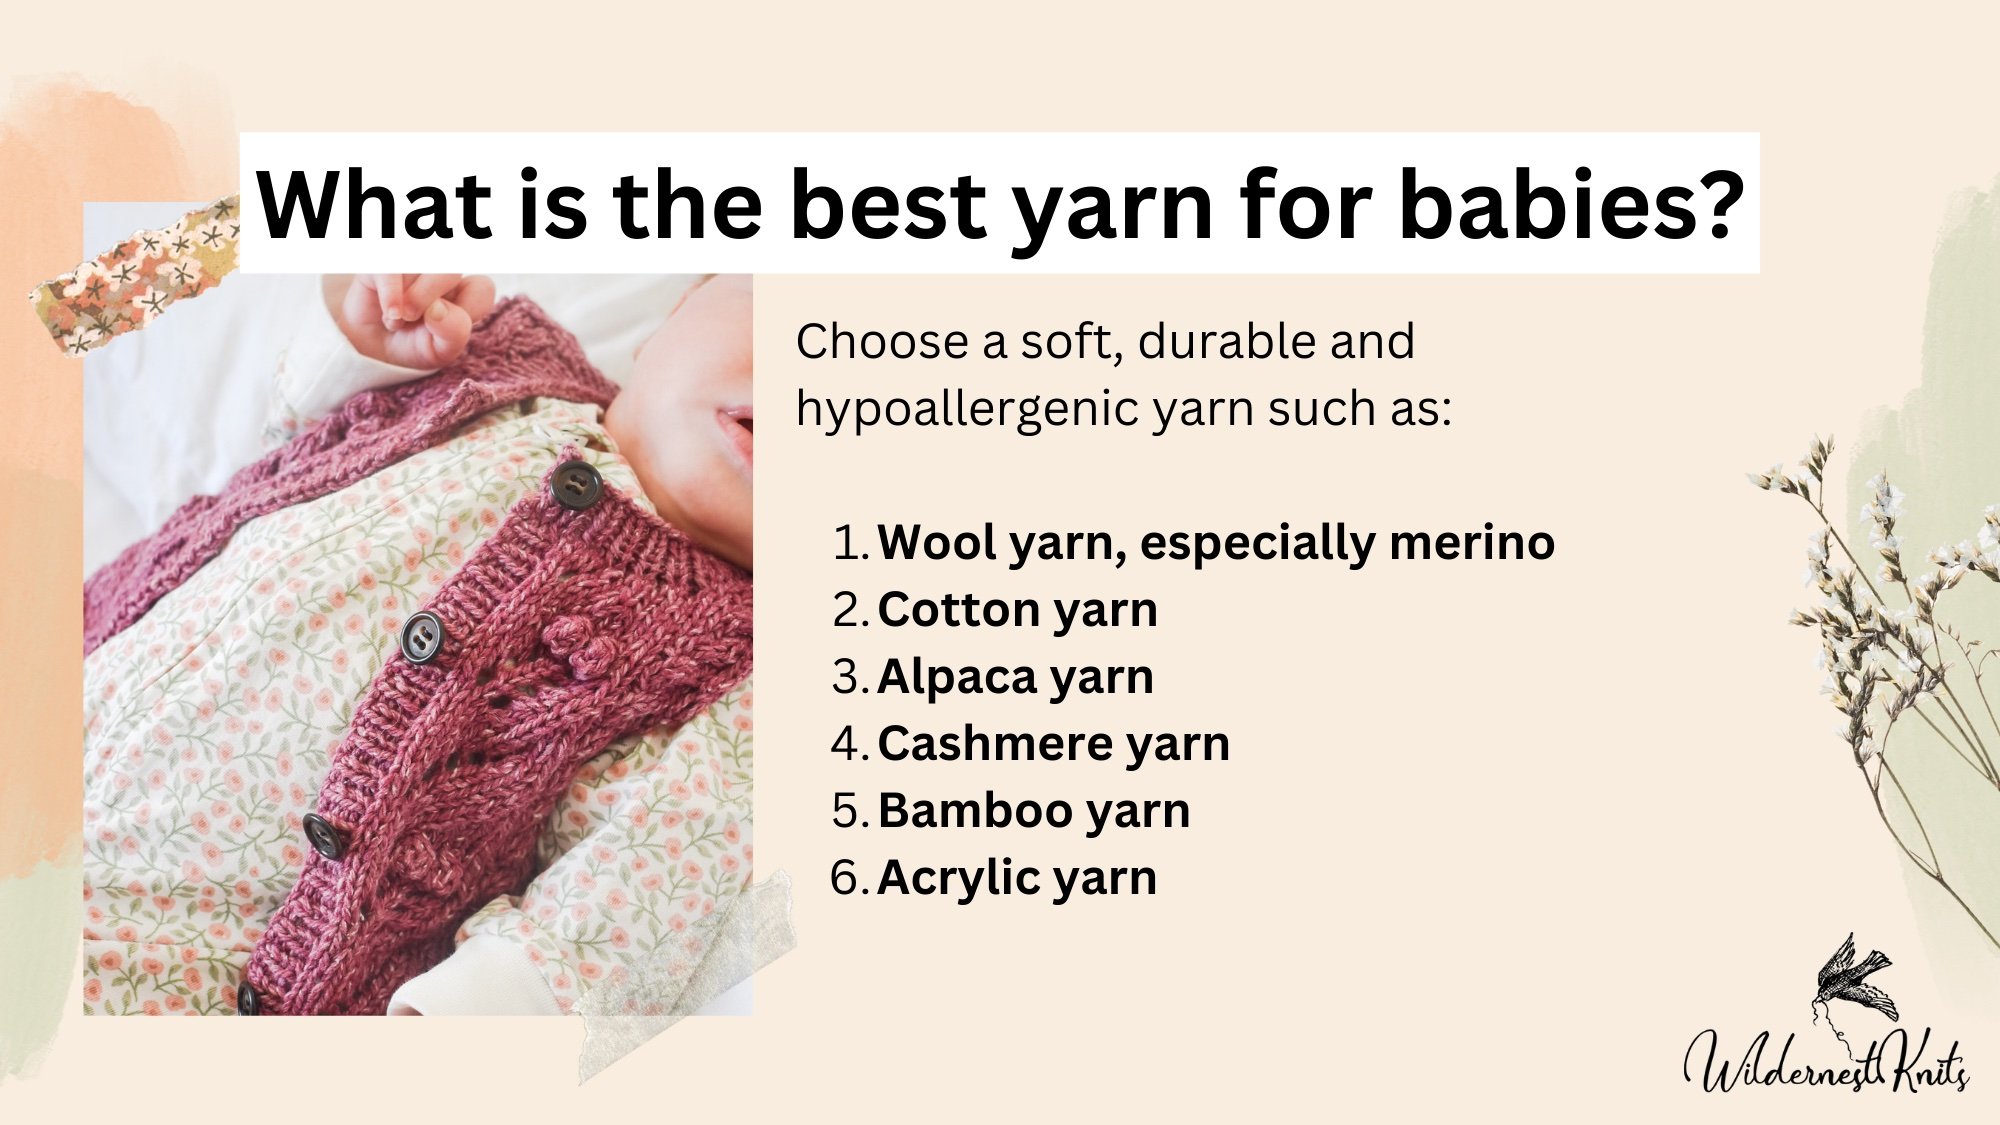 Knitting with Eco-Friendly Bamboo Yarn: Perfect for Lace